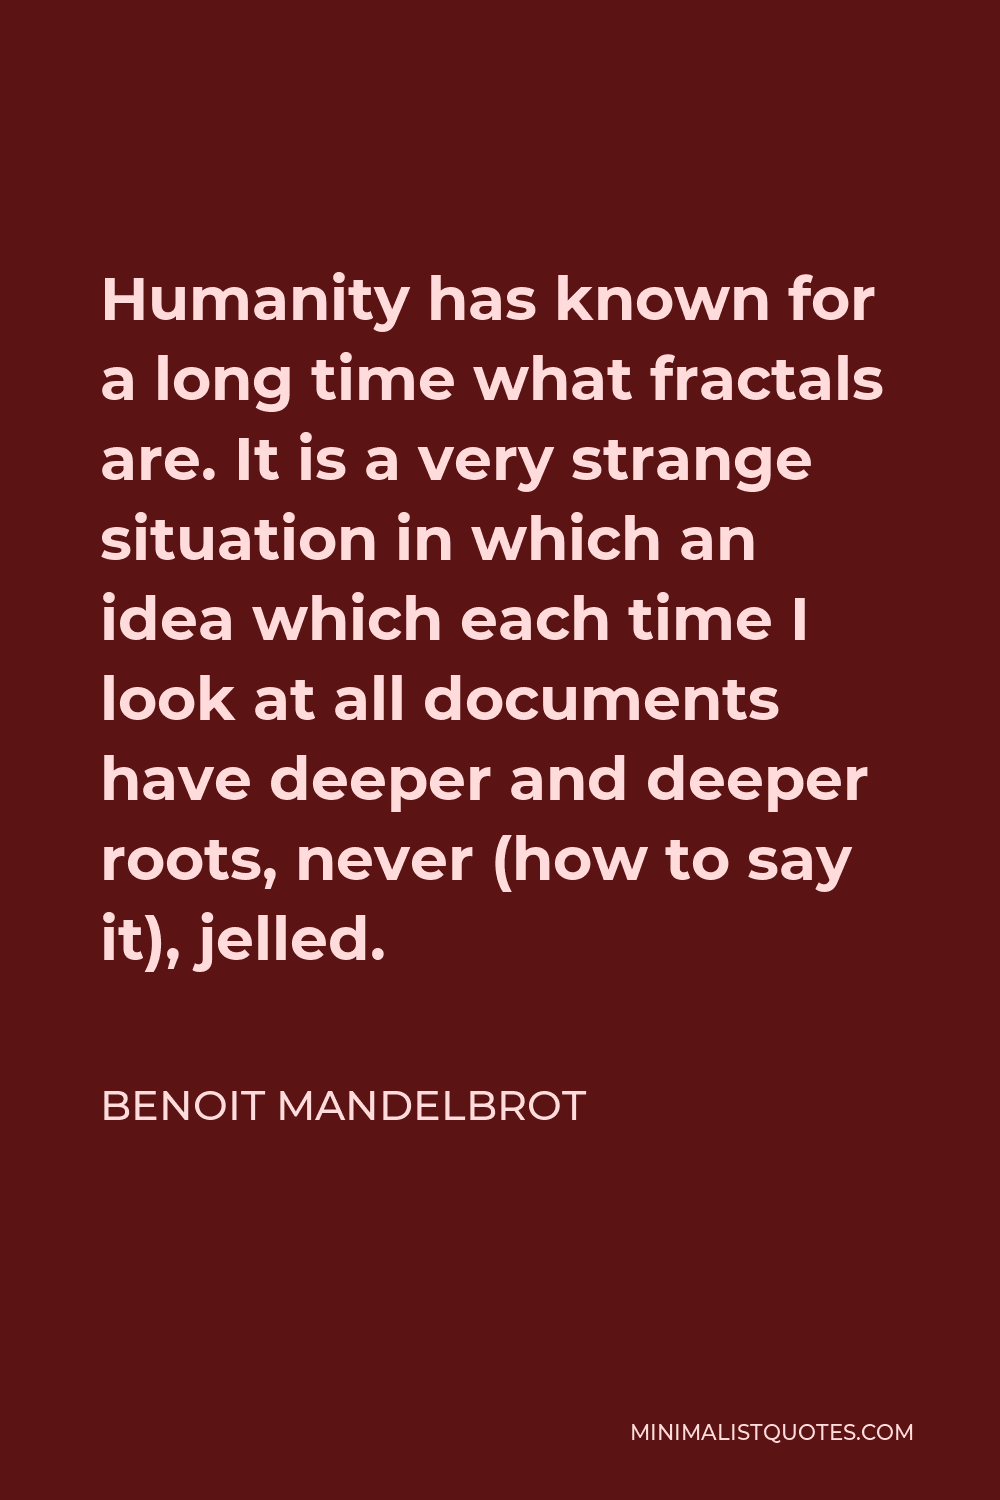 Benoit Mandelbrot Quote - Humanity has known for a long time what fractals are. It is a very strange situation in which an idea which each time I look at all documents have deeper and deeper roots, never (how to say it), jelled.